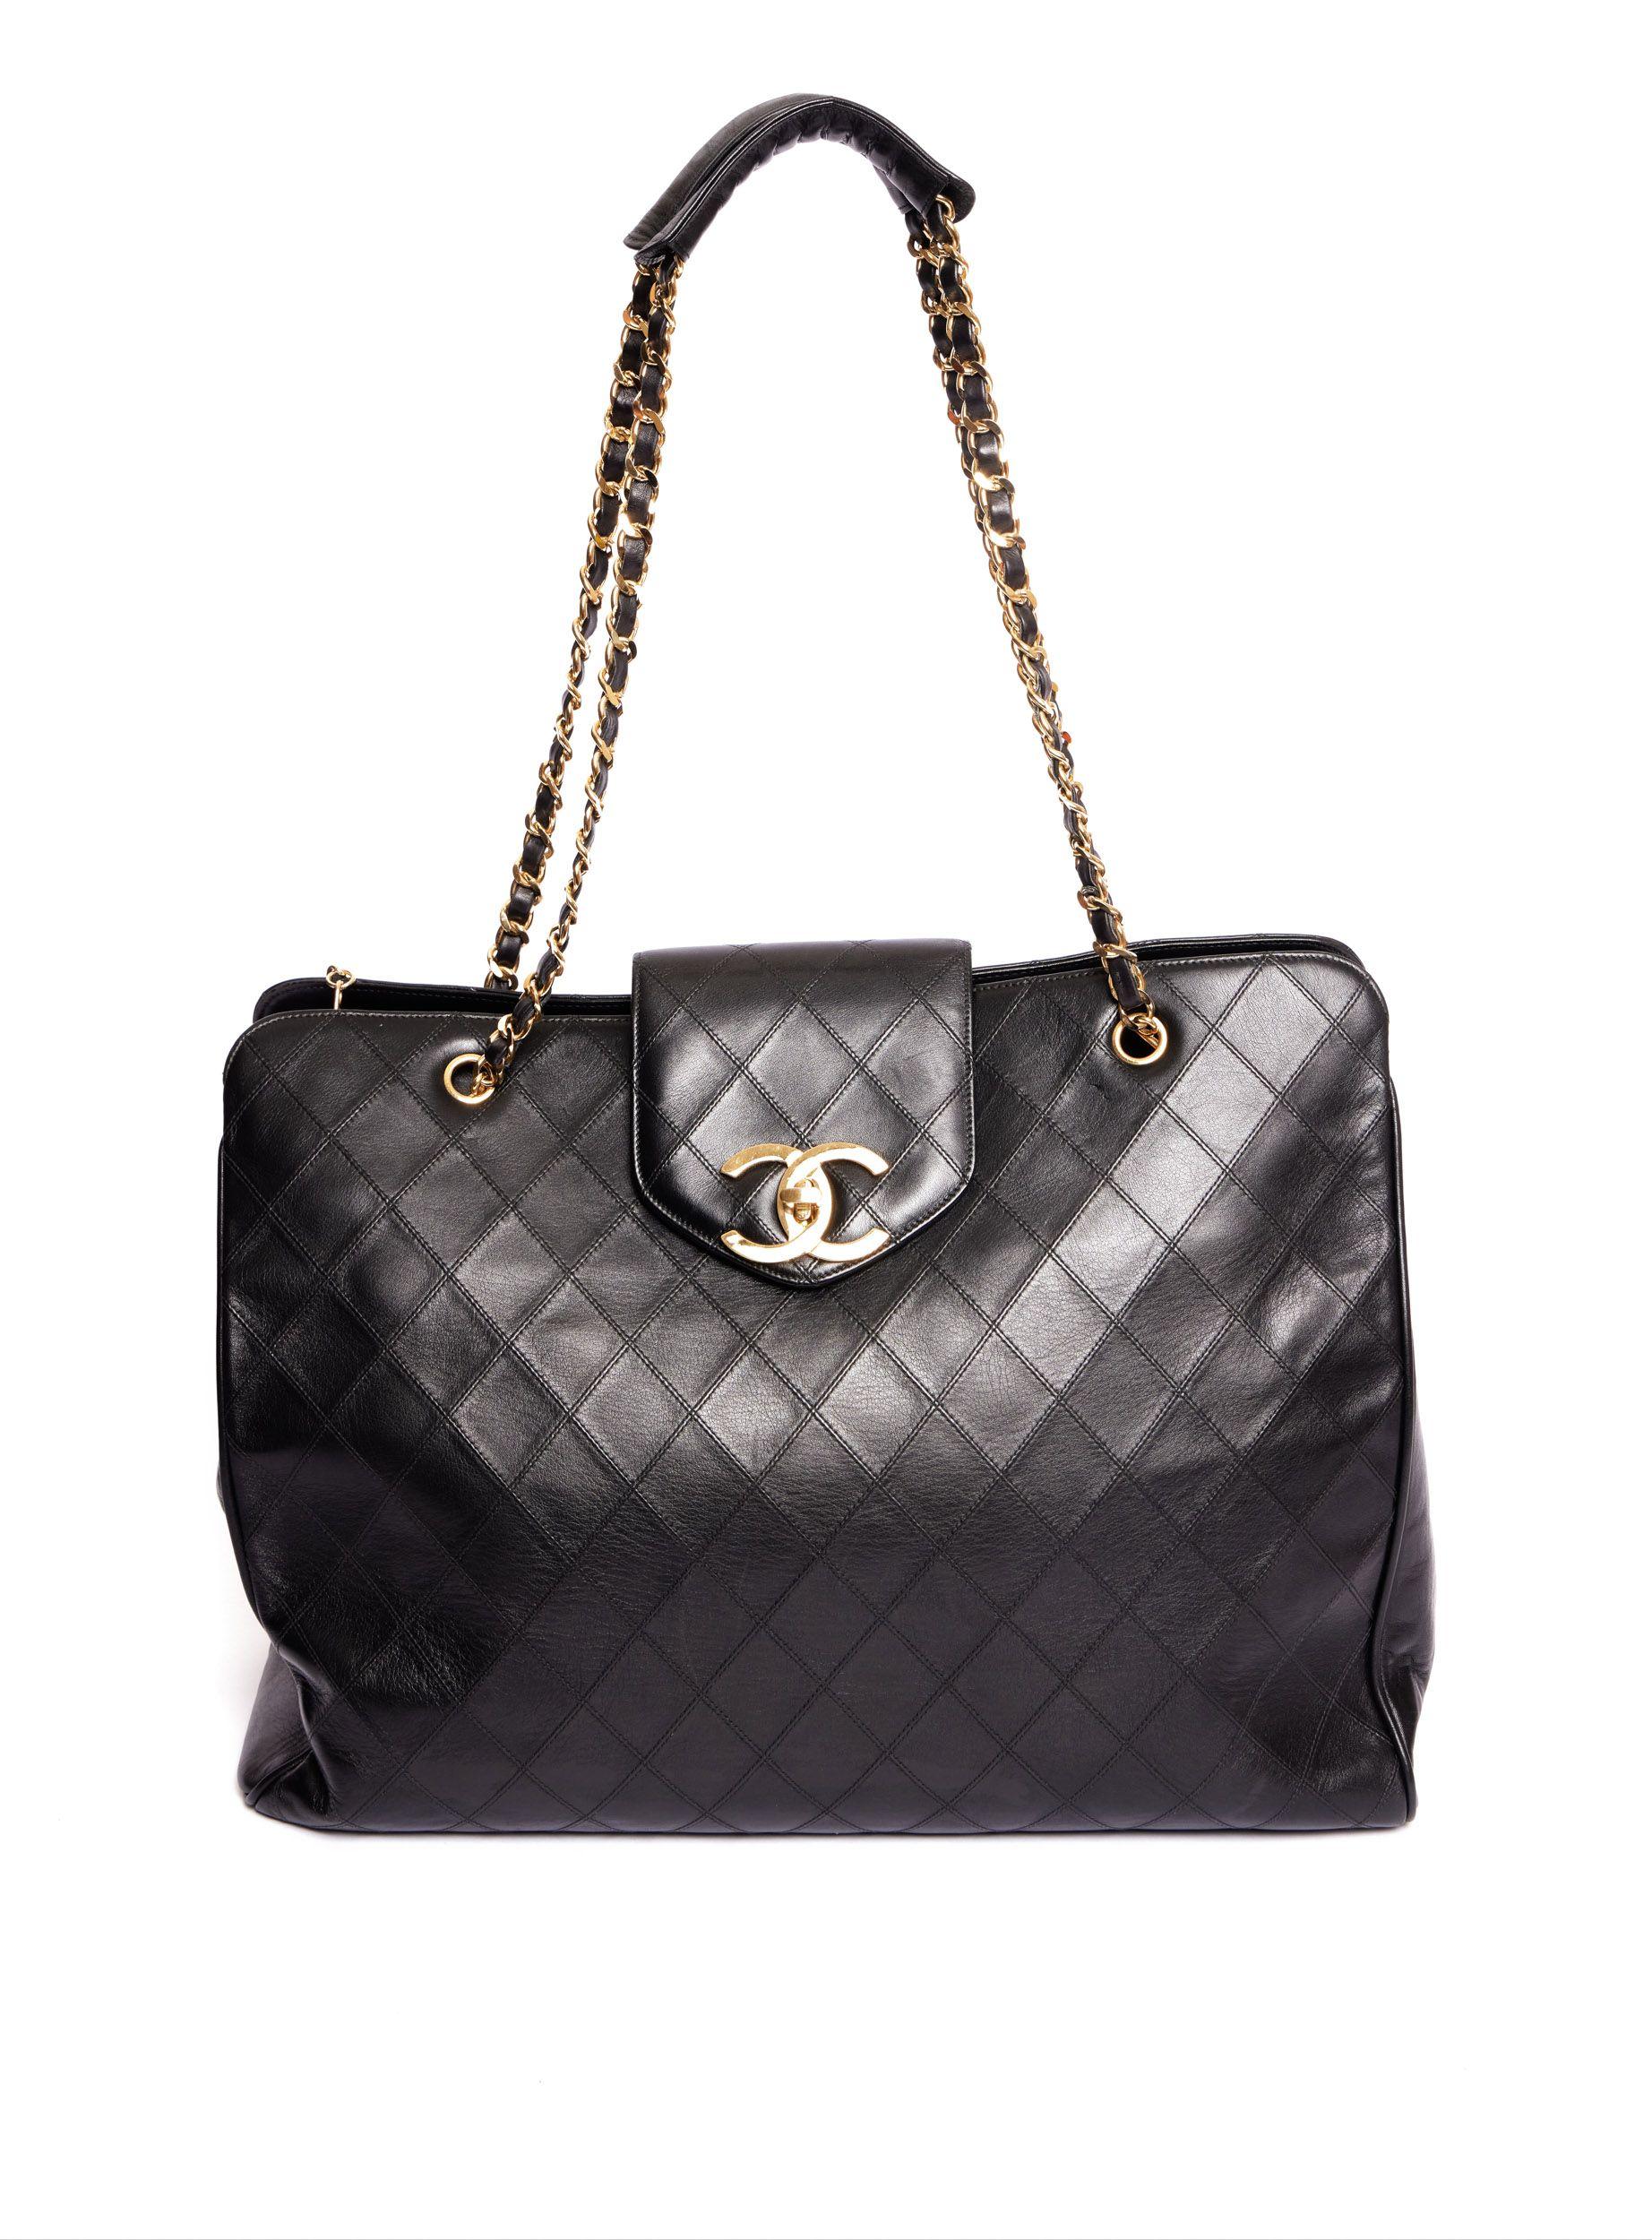 Chanel Supermodel flat quilted weekender. Black leather with gold tone hardware. 24kt gold plated .
Shoulder drop, 15